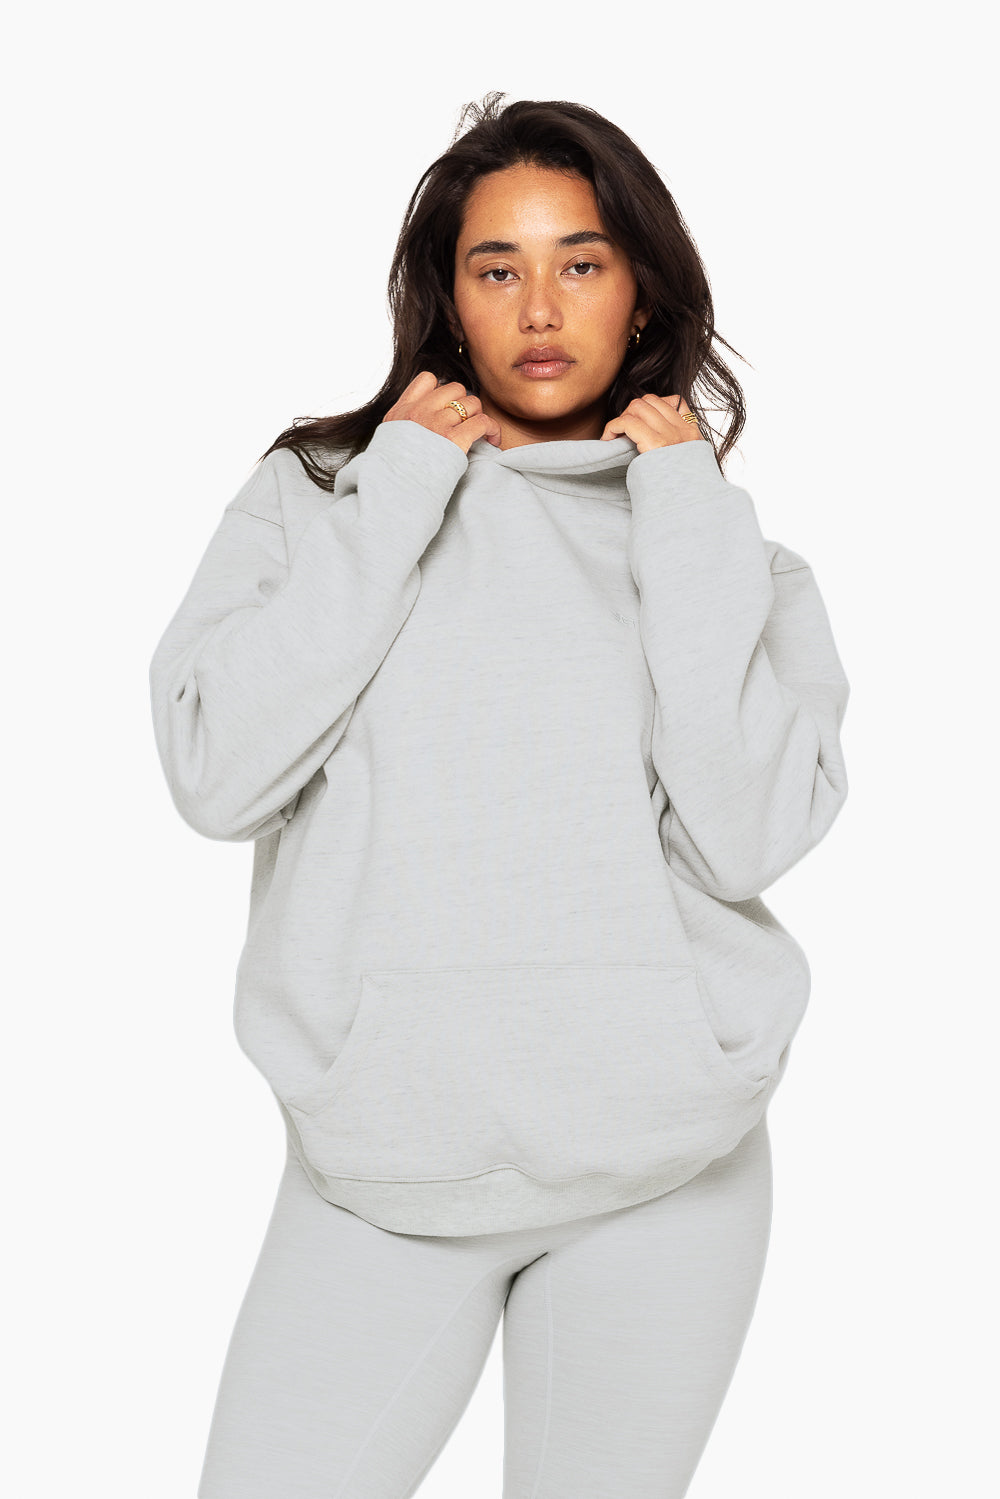 SET™ EMBROIDERED HEAVYWEIGHT SWEATS HOODIE IN HEATHER GREY